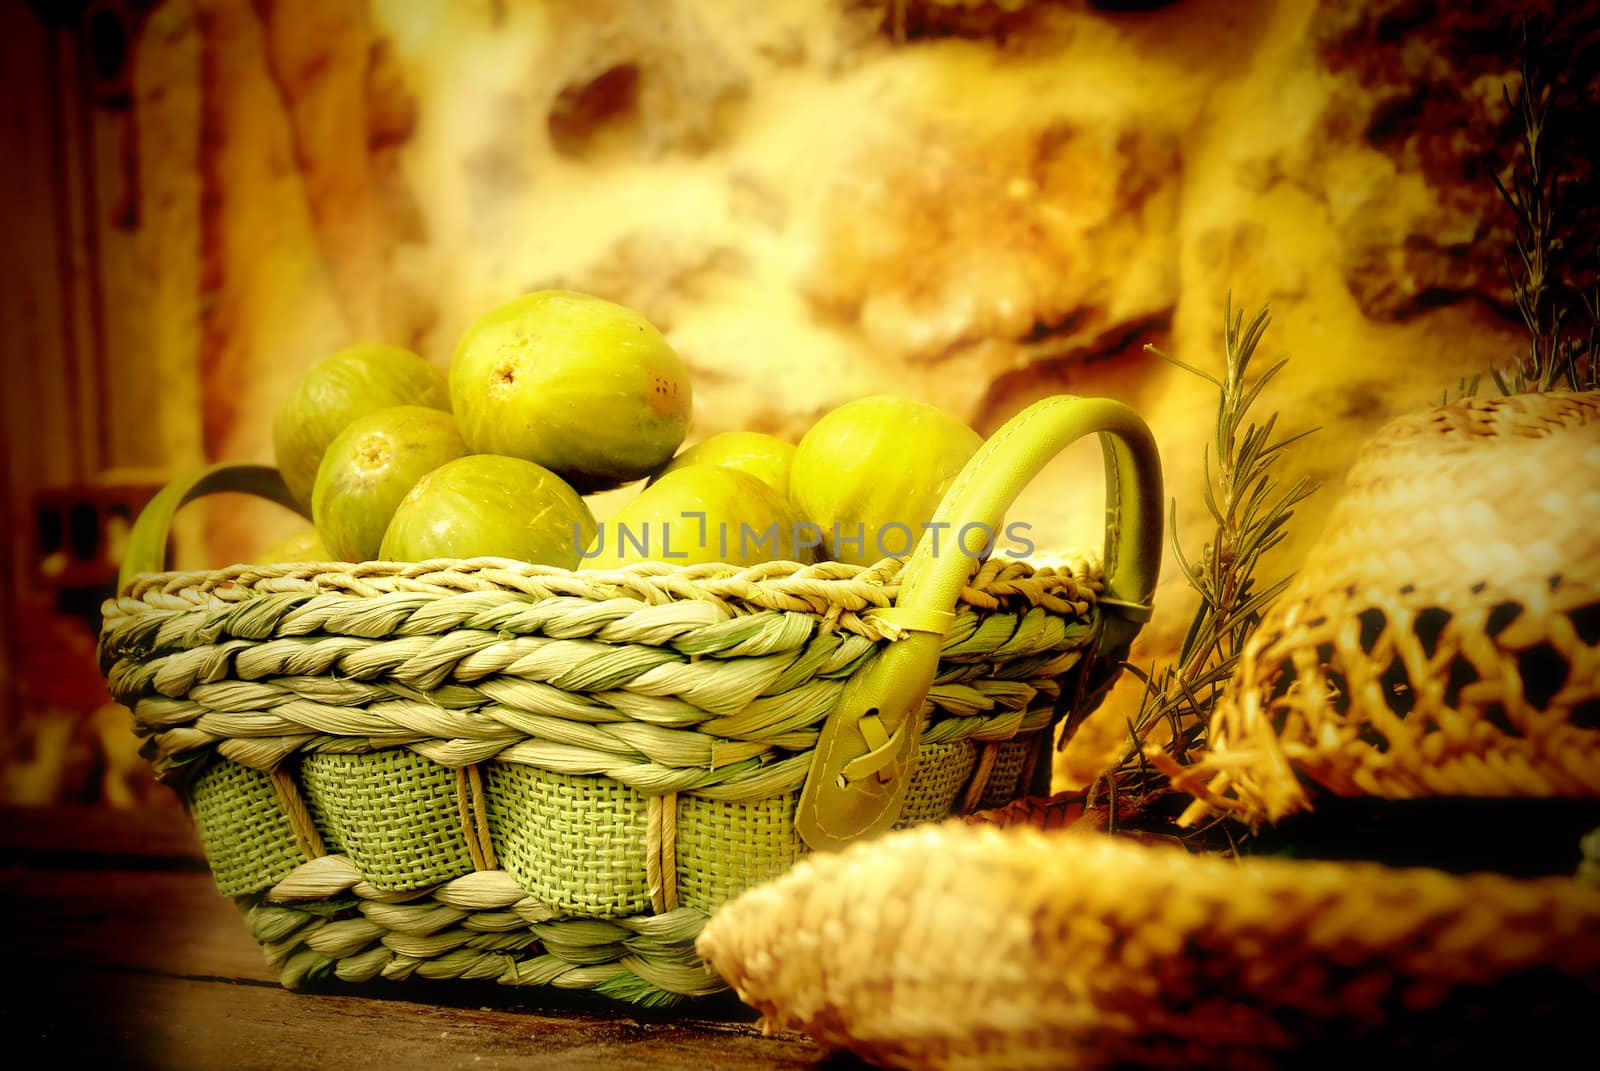 basket of figs and straw hat, country scene